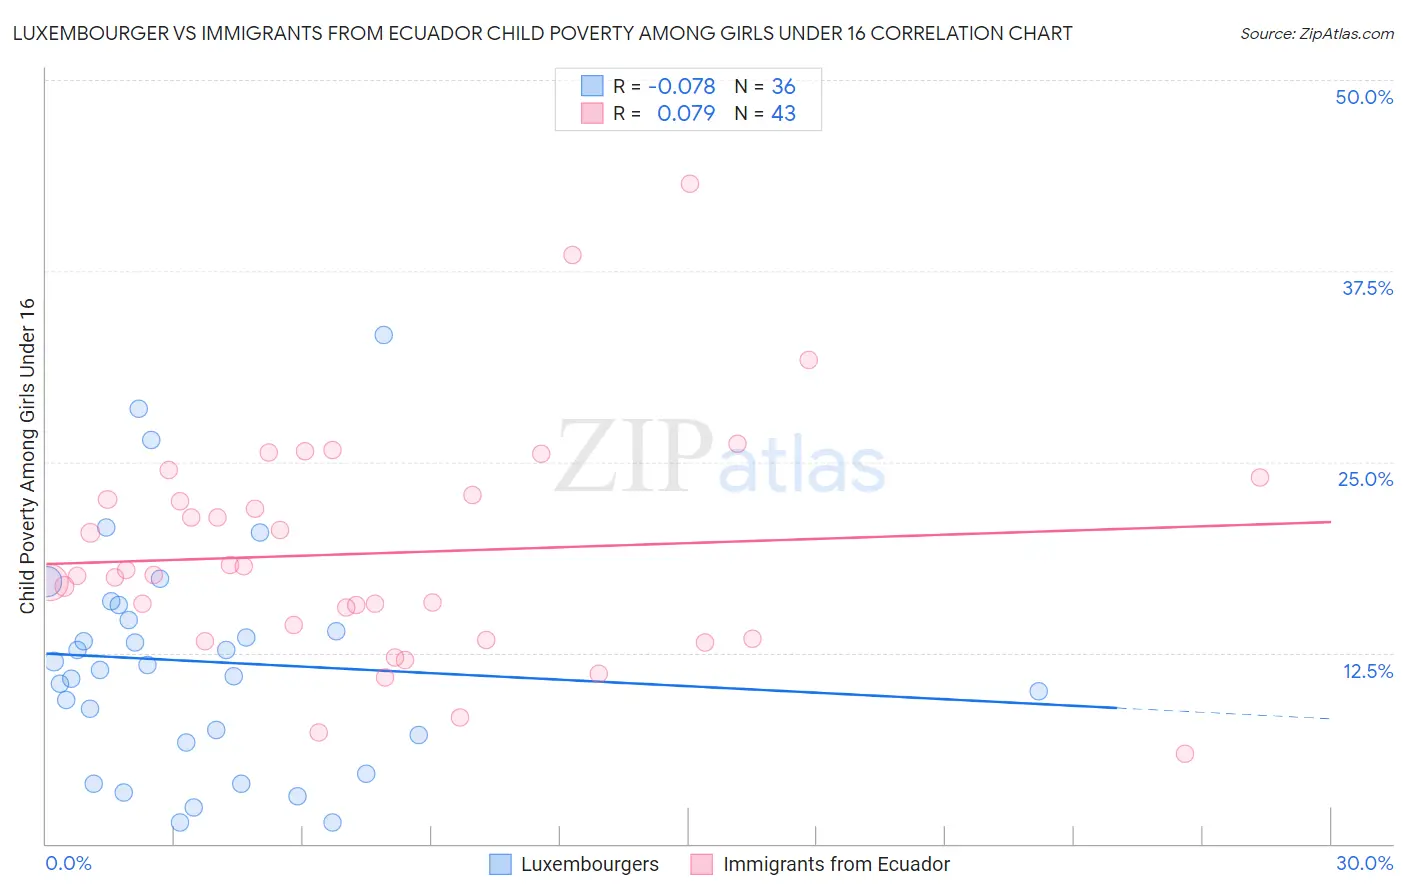 Luxembourger vs Immigrants from Ecuador Child Poverty Among Girls Under 16